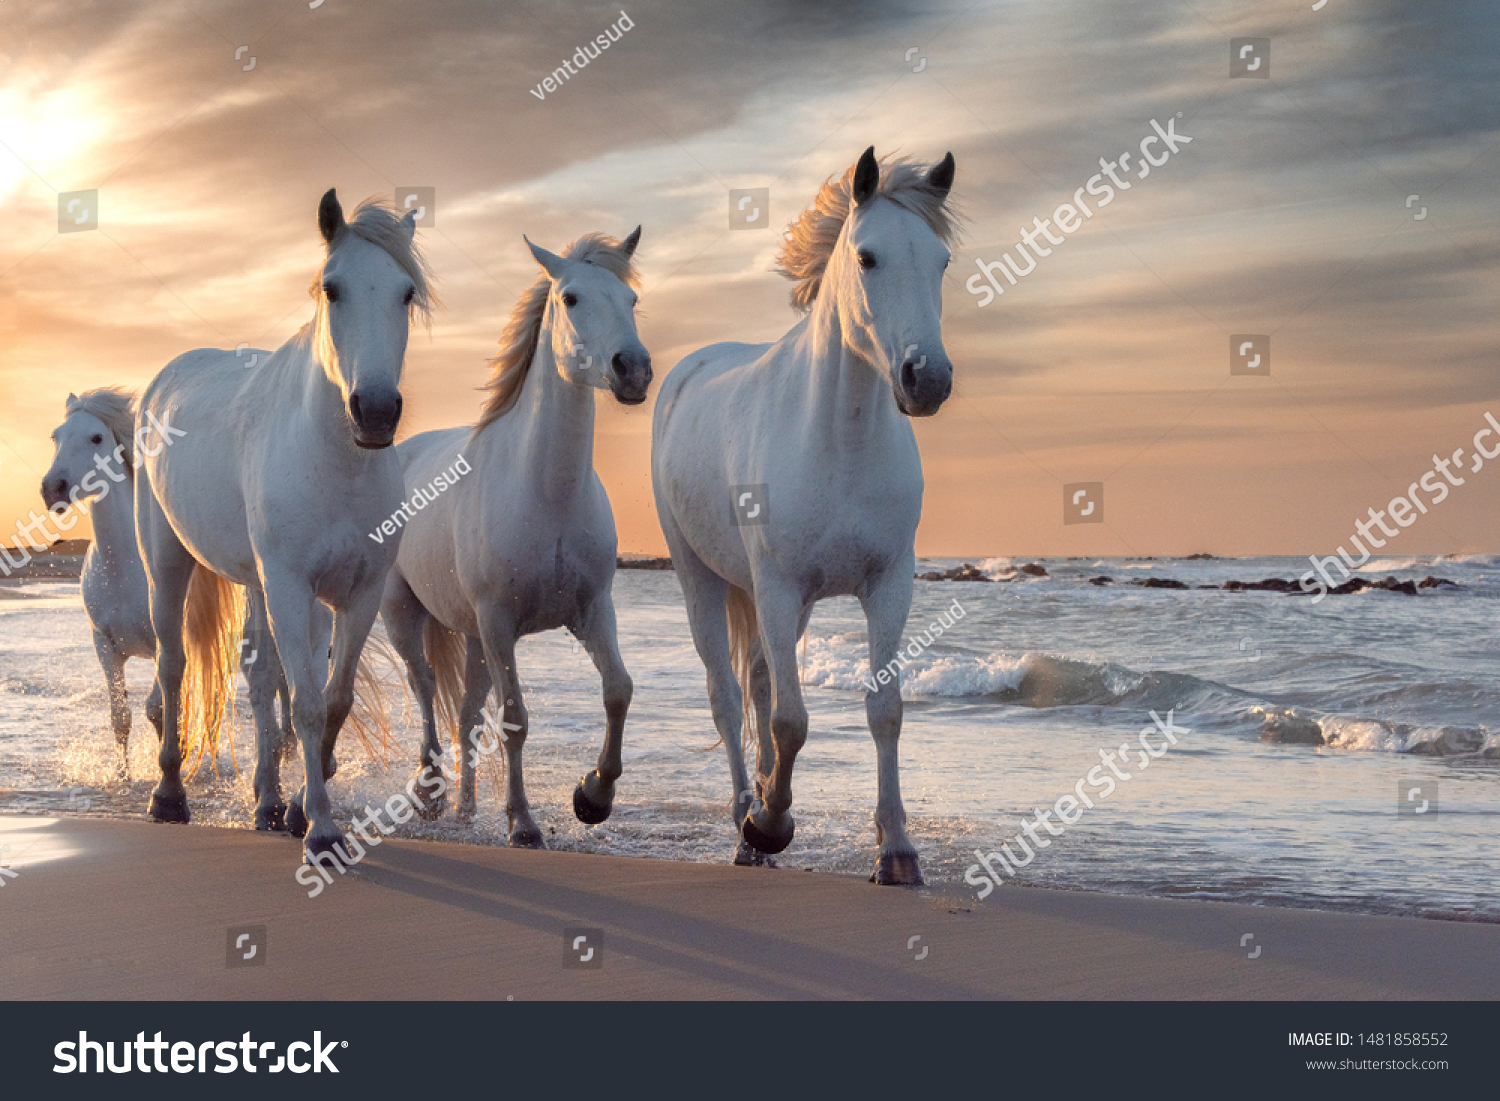 Herd of white horses running through the water. Image taken in Camargue, France. #1481858552